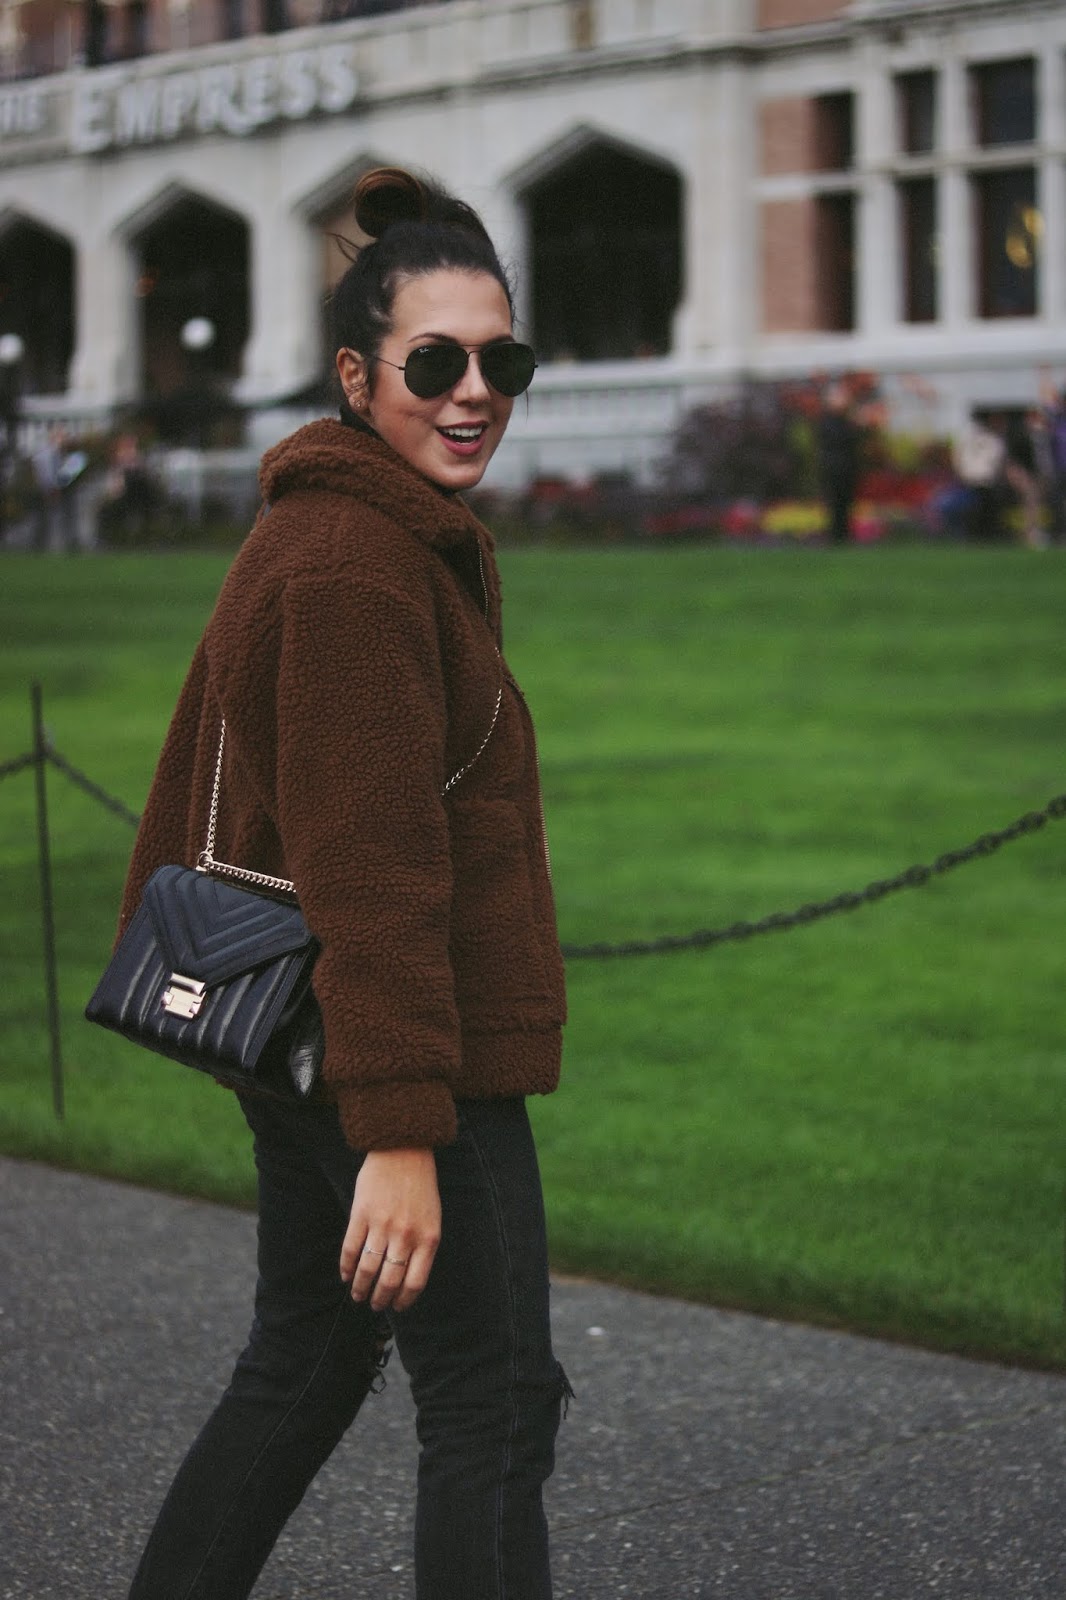 michael kors whitney bag Teddy Bear Coat outfit vancouver fashion blogger garage levis wedgie victoria empress hotel